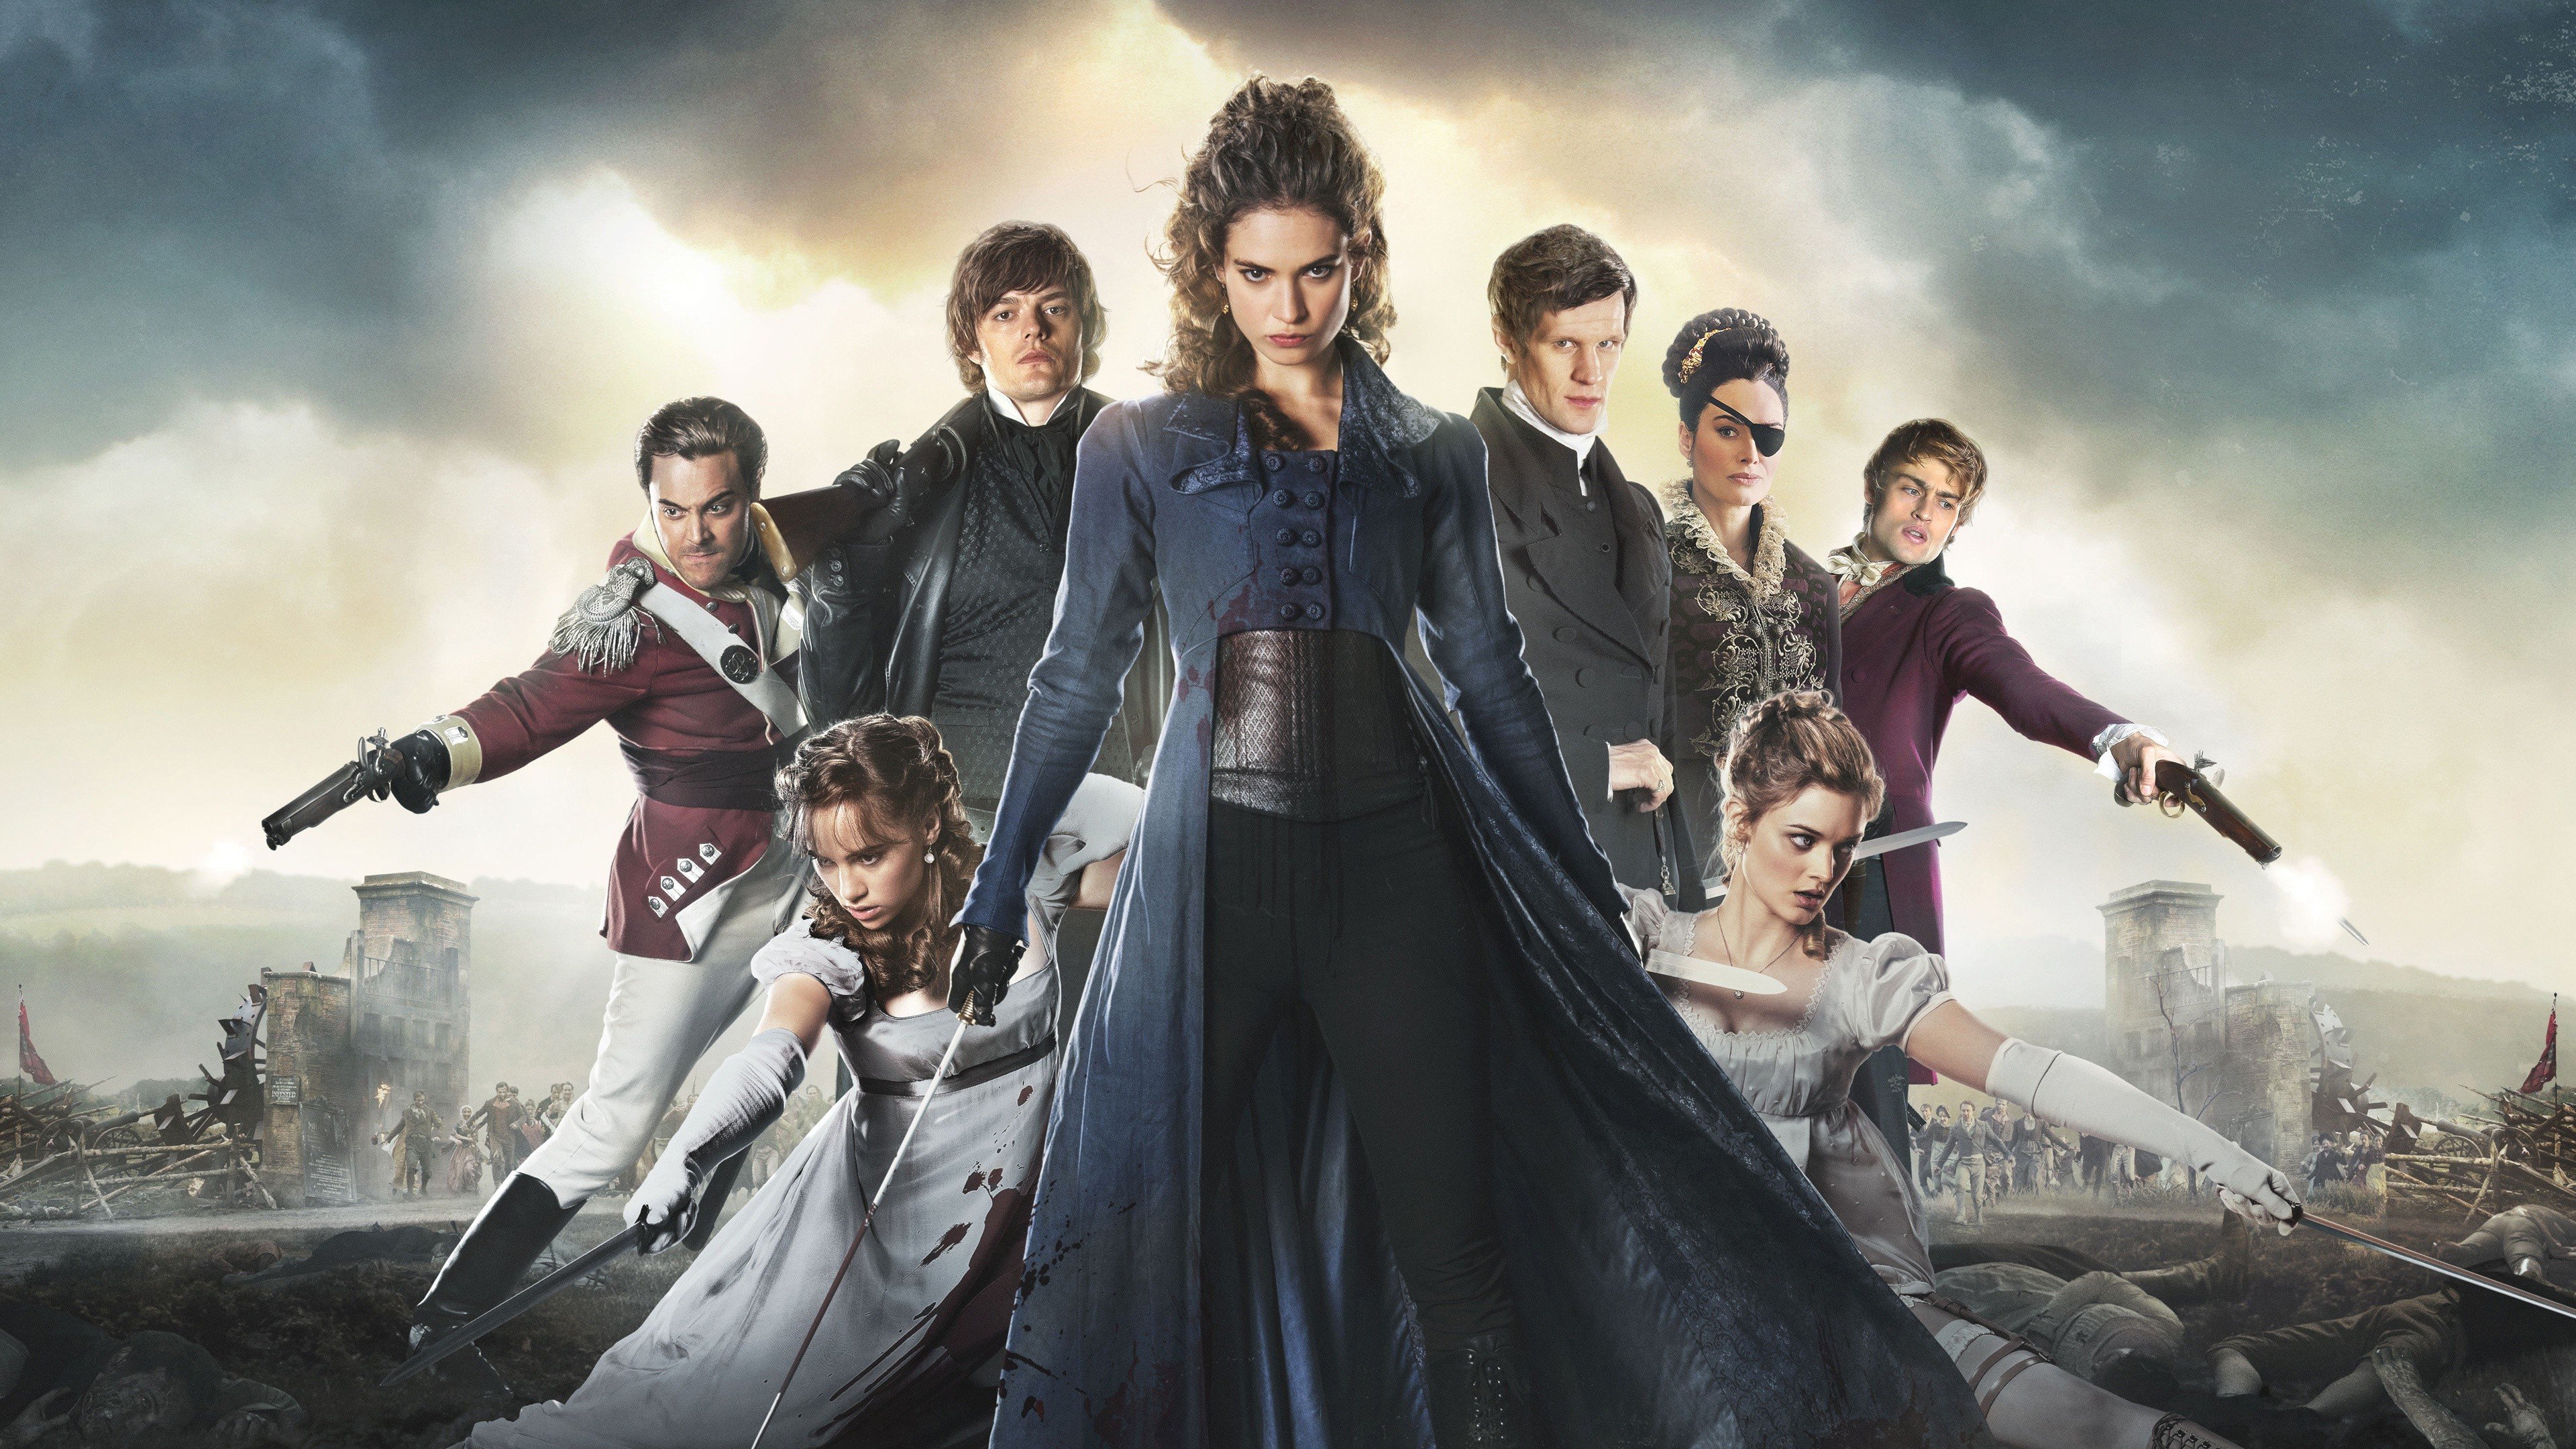 actor, Costumes, Sword, Lena Headey, Pride and Prejudice and Zombies, Charles Dance, Sam Riley Wallpaper